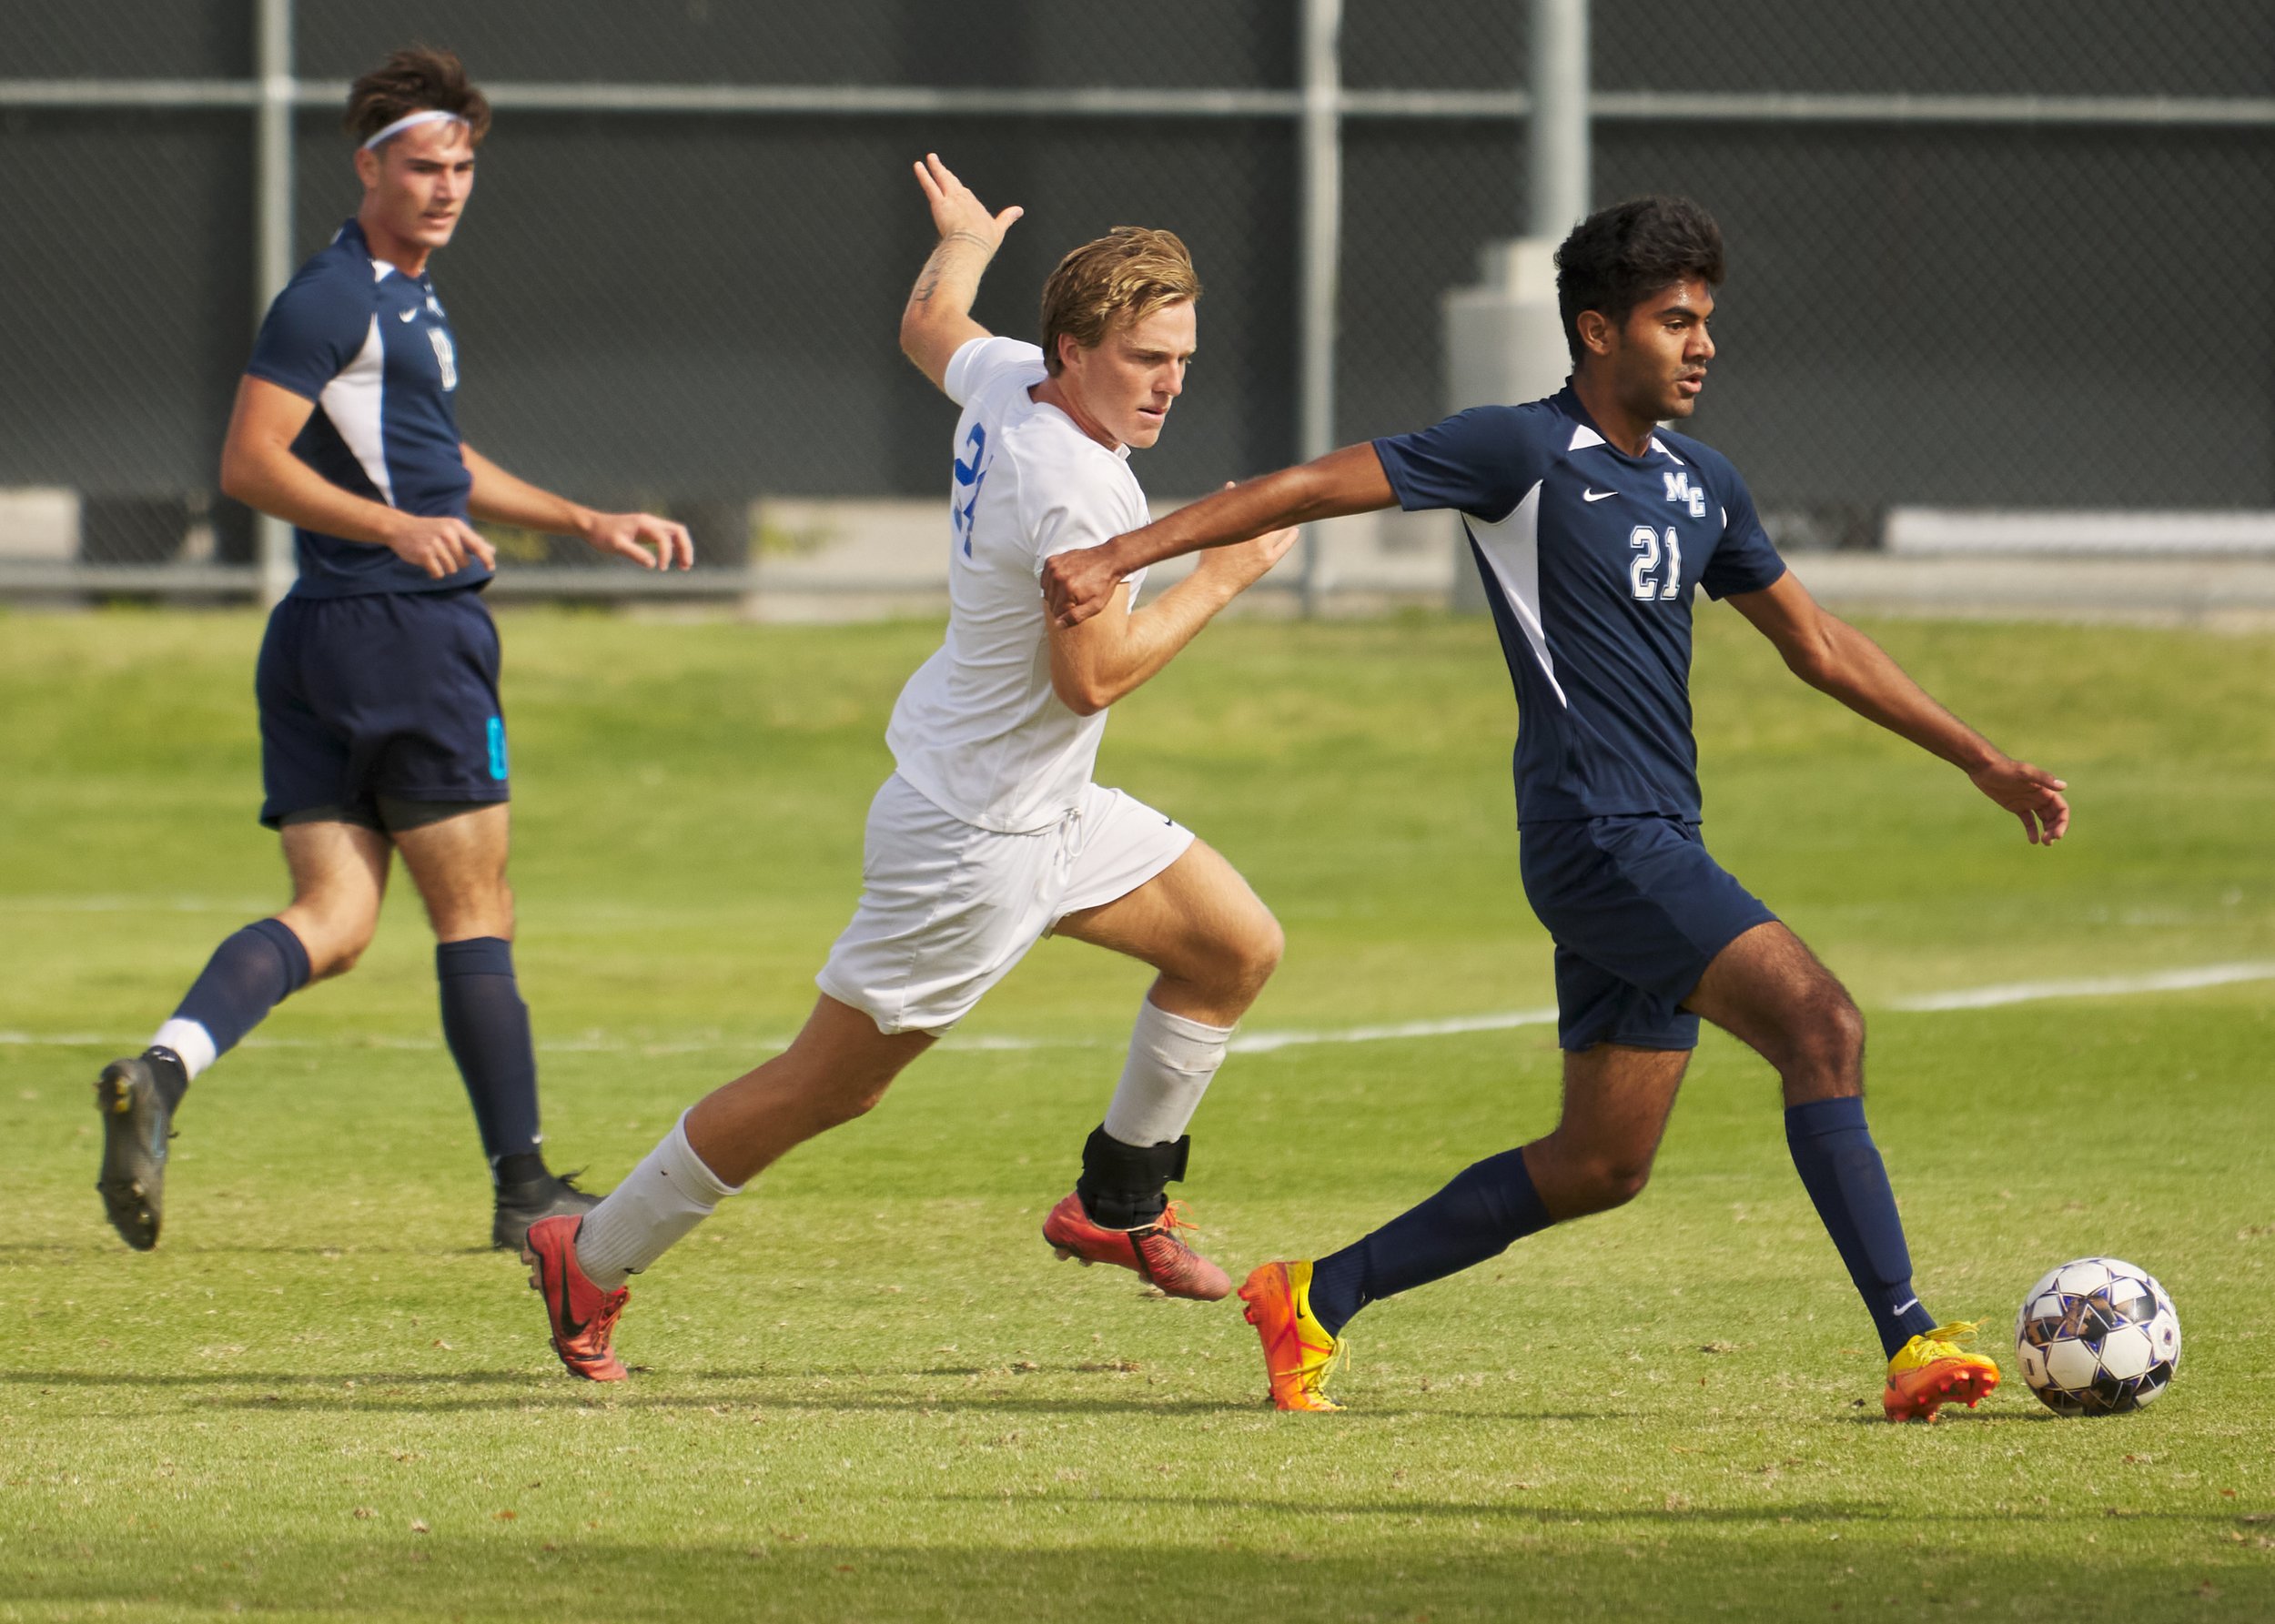  Santa Monica College Corsairs' Alexander Lalor (center) and Moorpark College Raiders' Christian Bower (left) and Diego Herrera (right) during the men's soccer match on Friday, Nov. 11, 2022, at Field Hockey Stadium in Moorpark, Calif. The Corsairs w